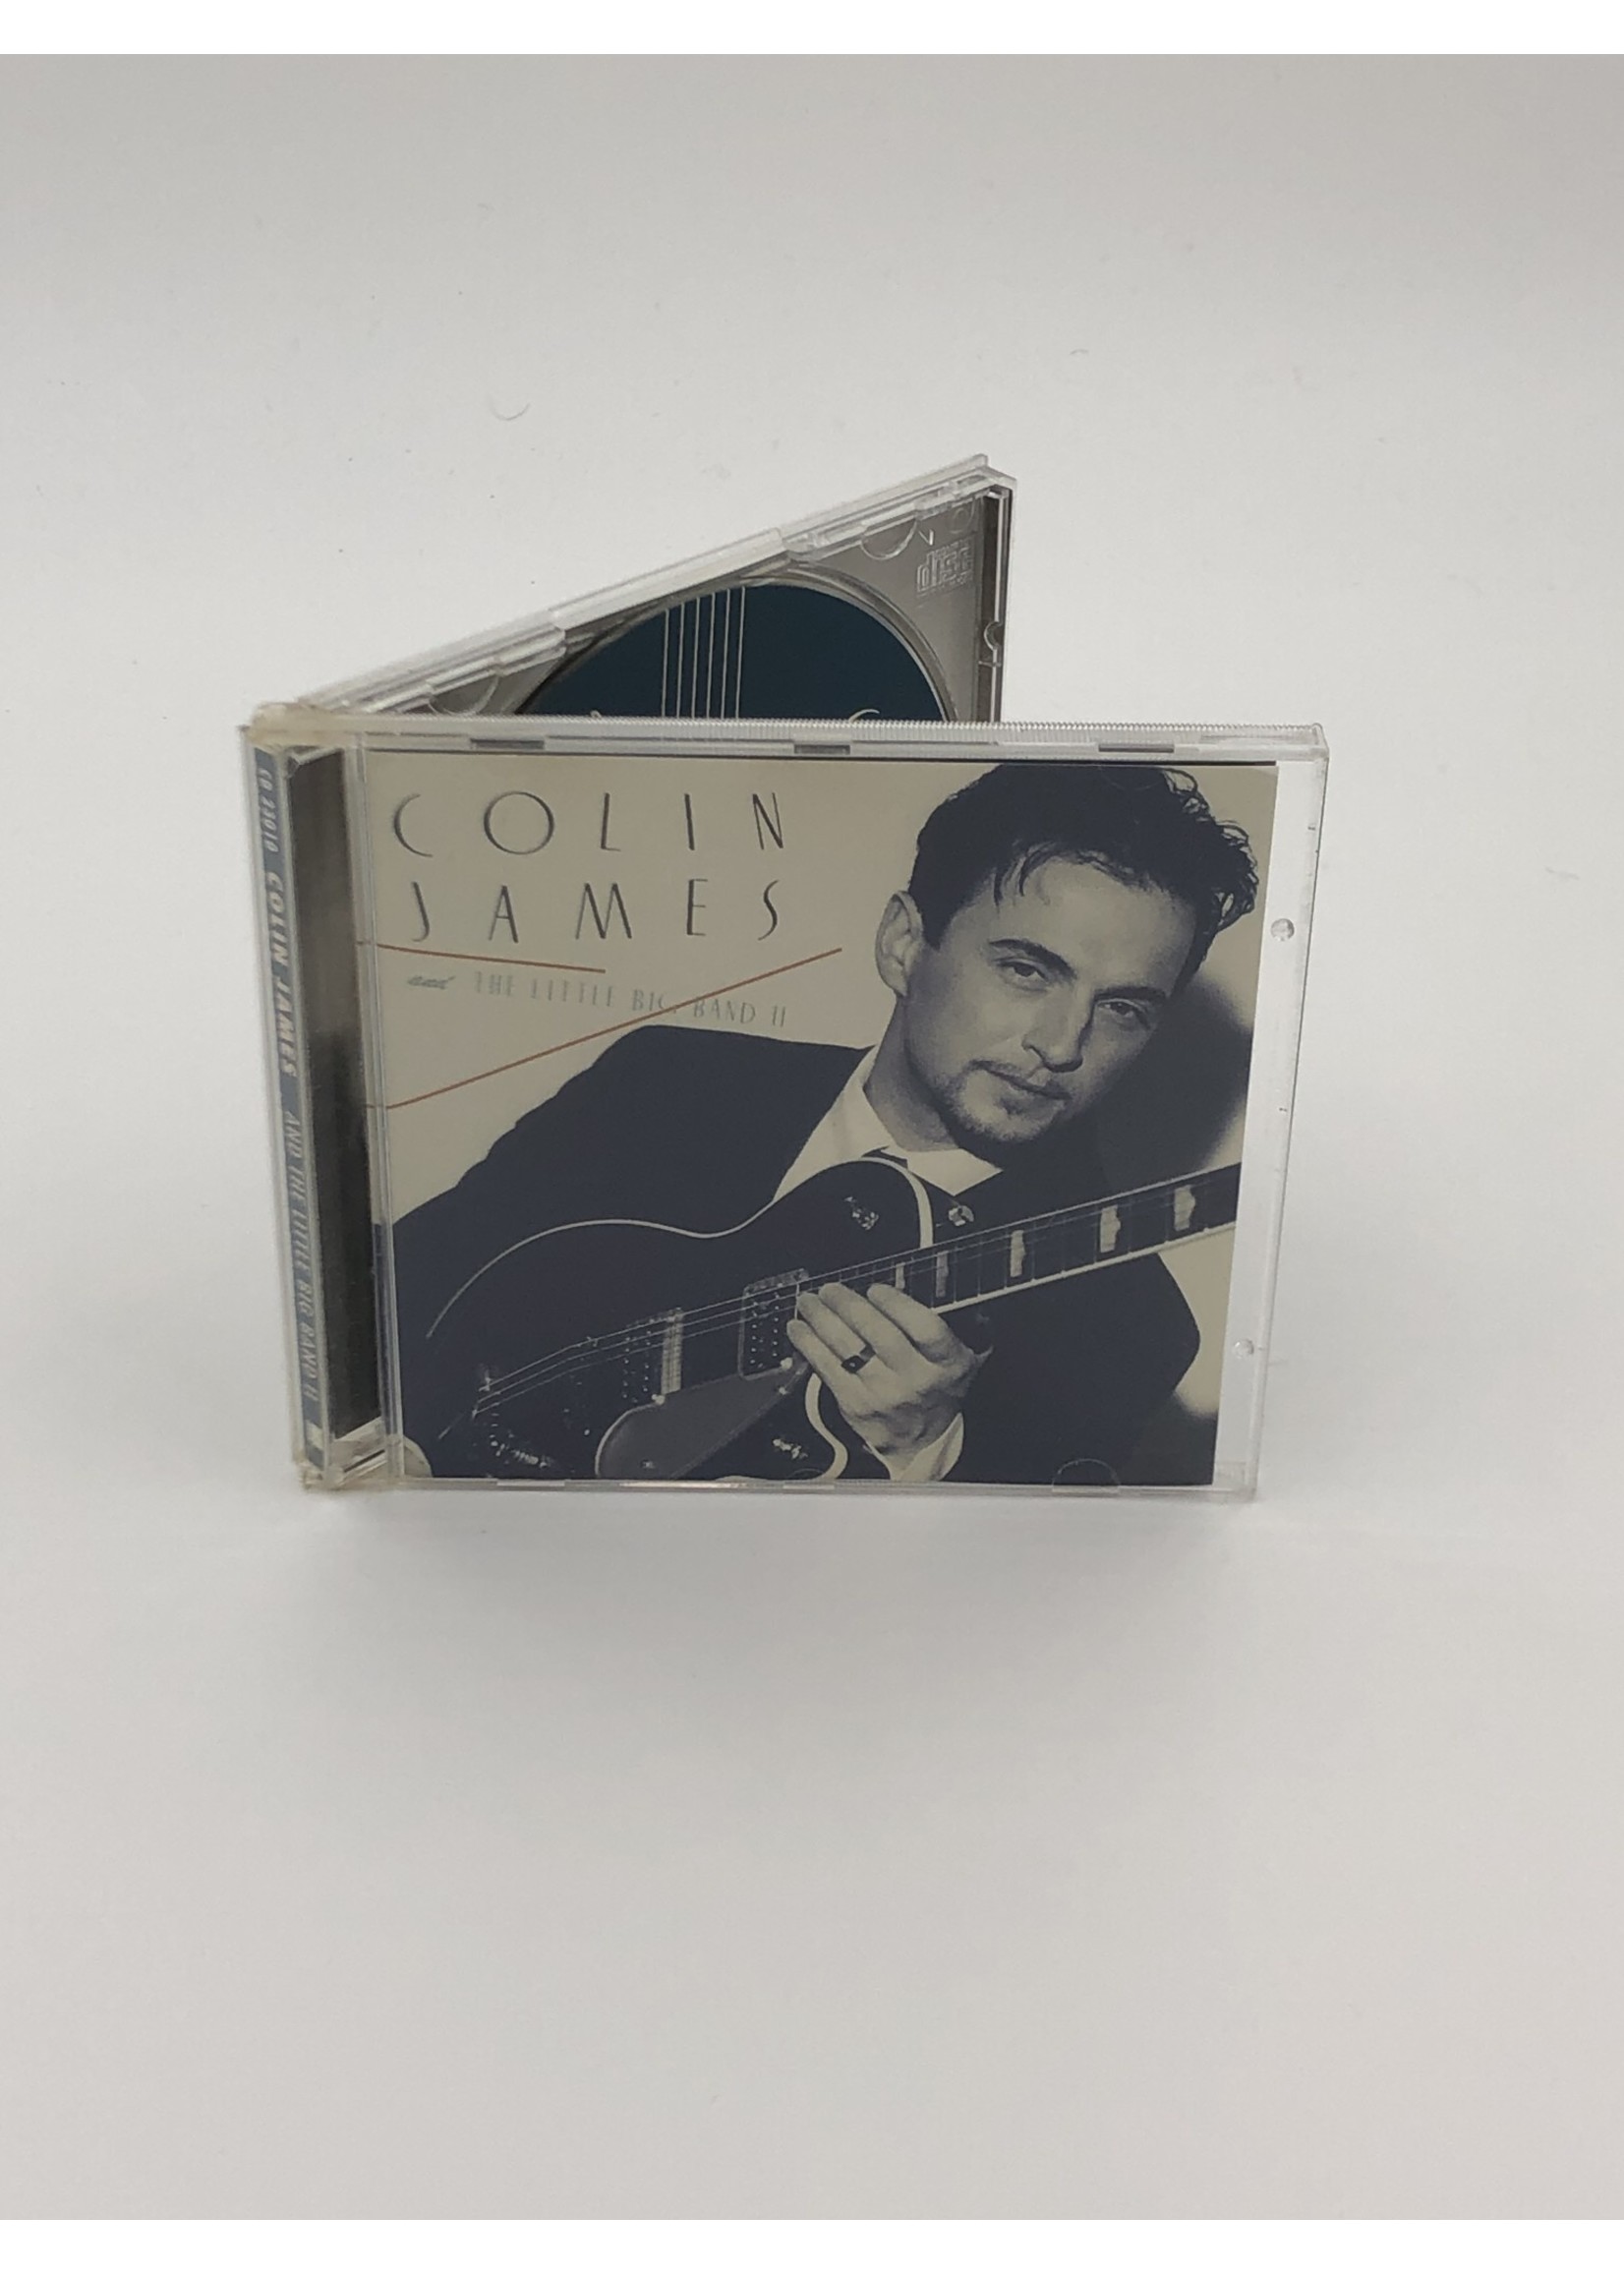 CD Colin James And the Little Big Band 2 CD